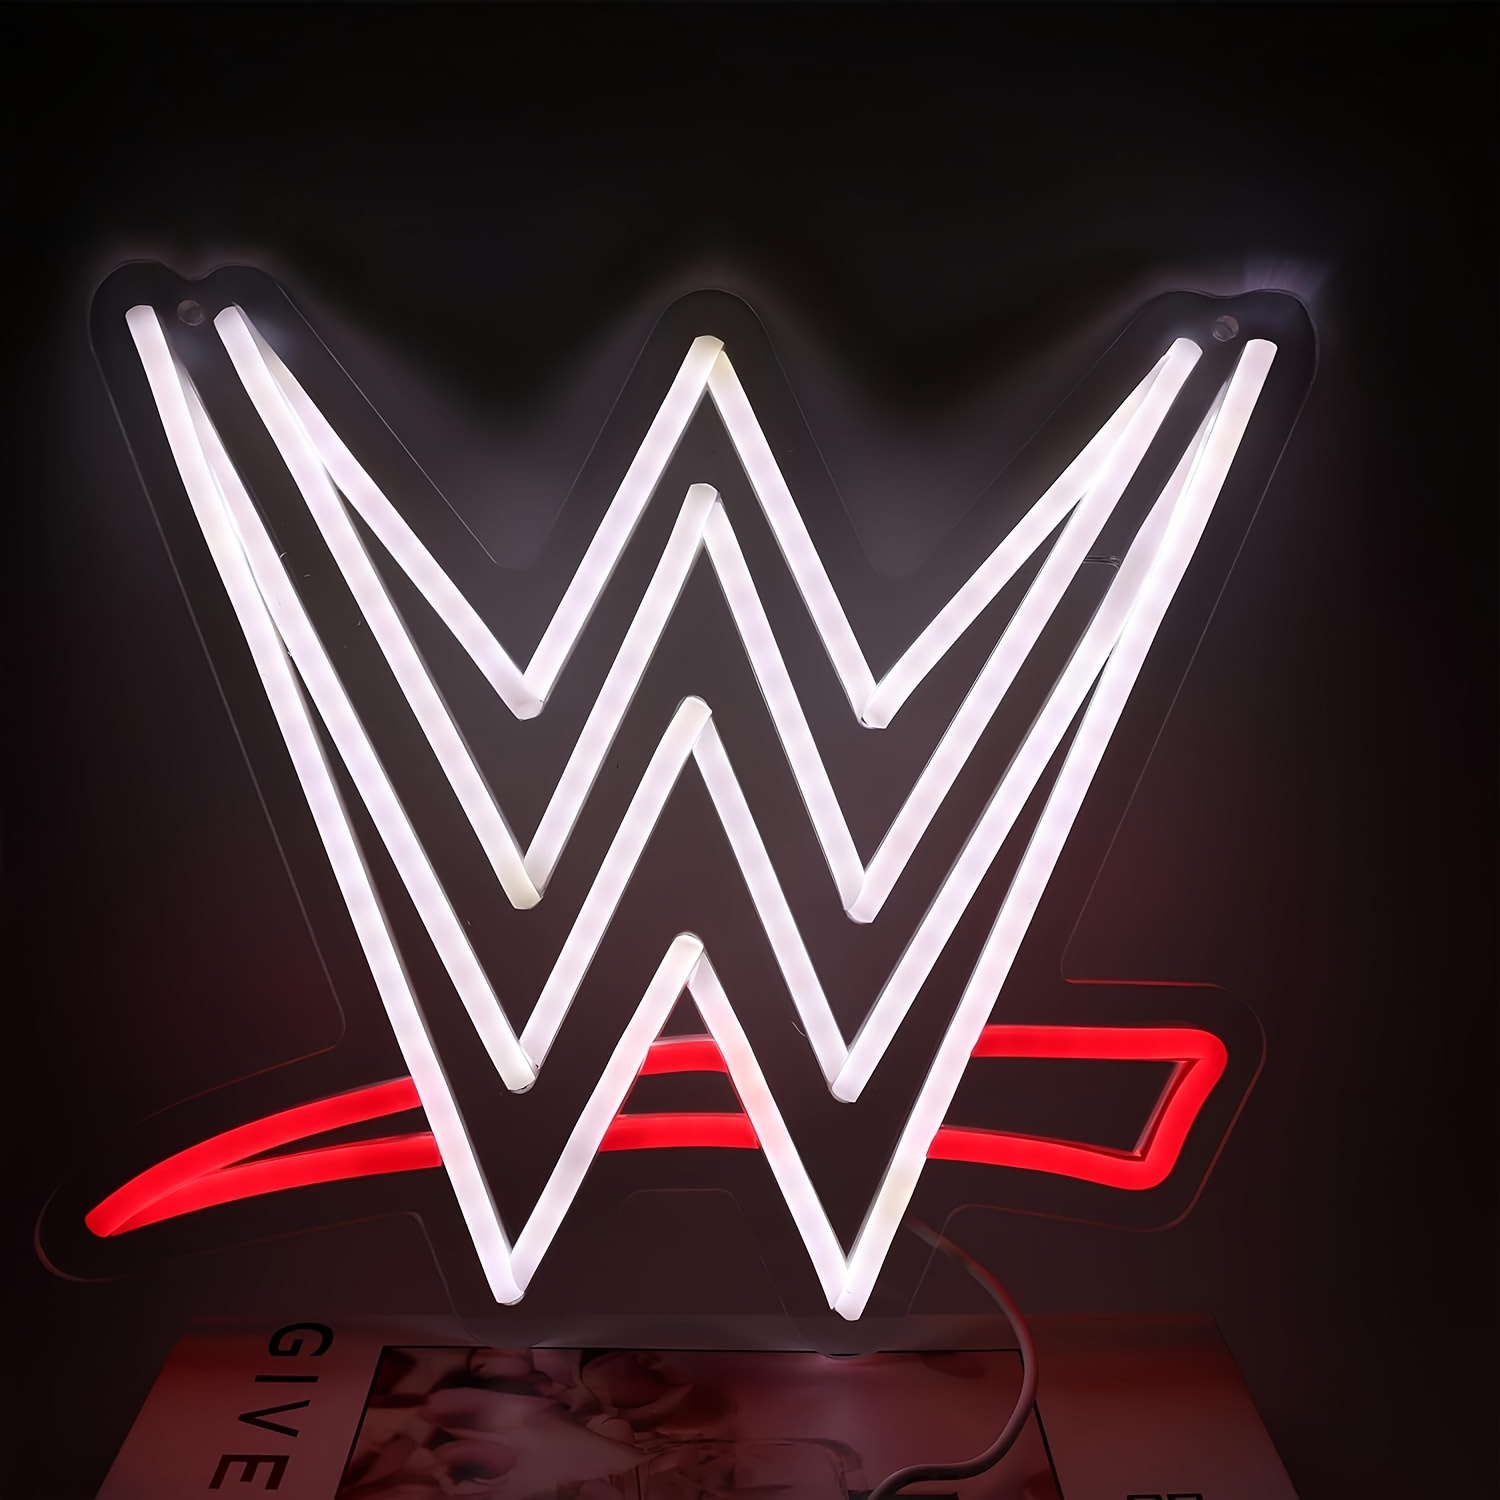 

Wwe Neon Sign, Multicolor Usb Powered Wall Hanging Neon Light With Push Button Control, Multipurpose Plastic Neon Light With Dimmer Function - No Battery Required